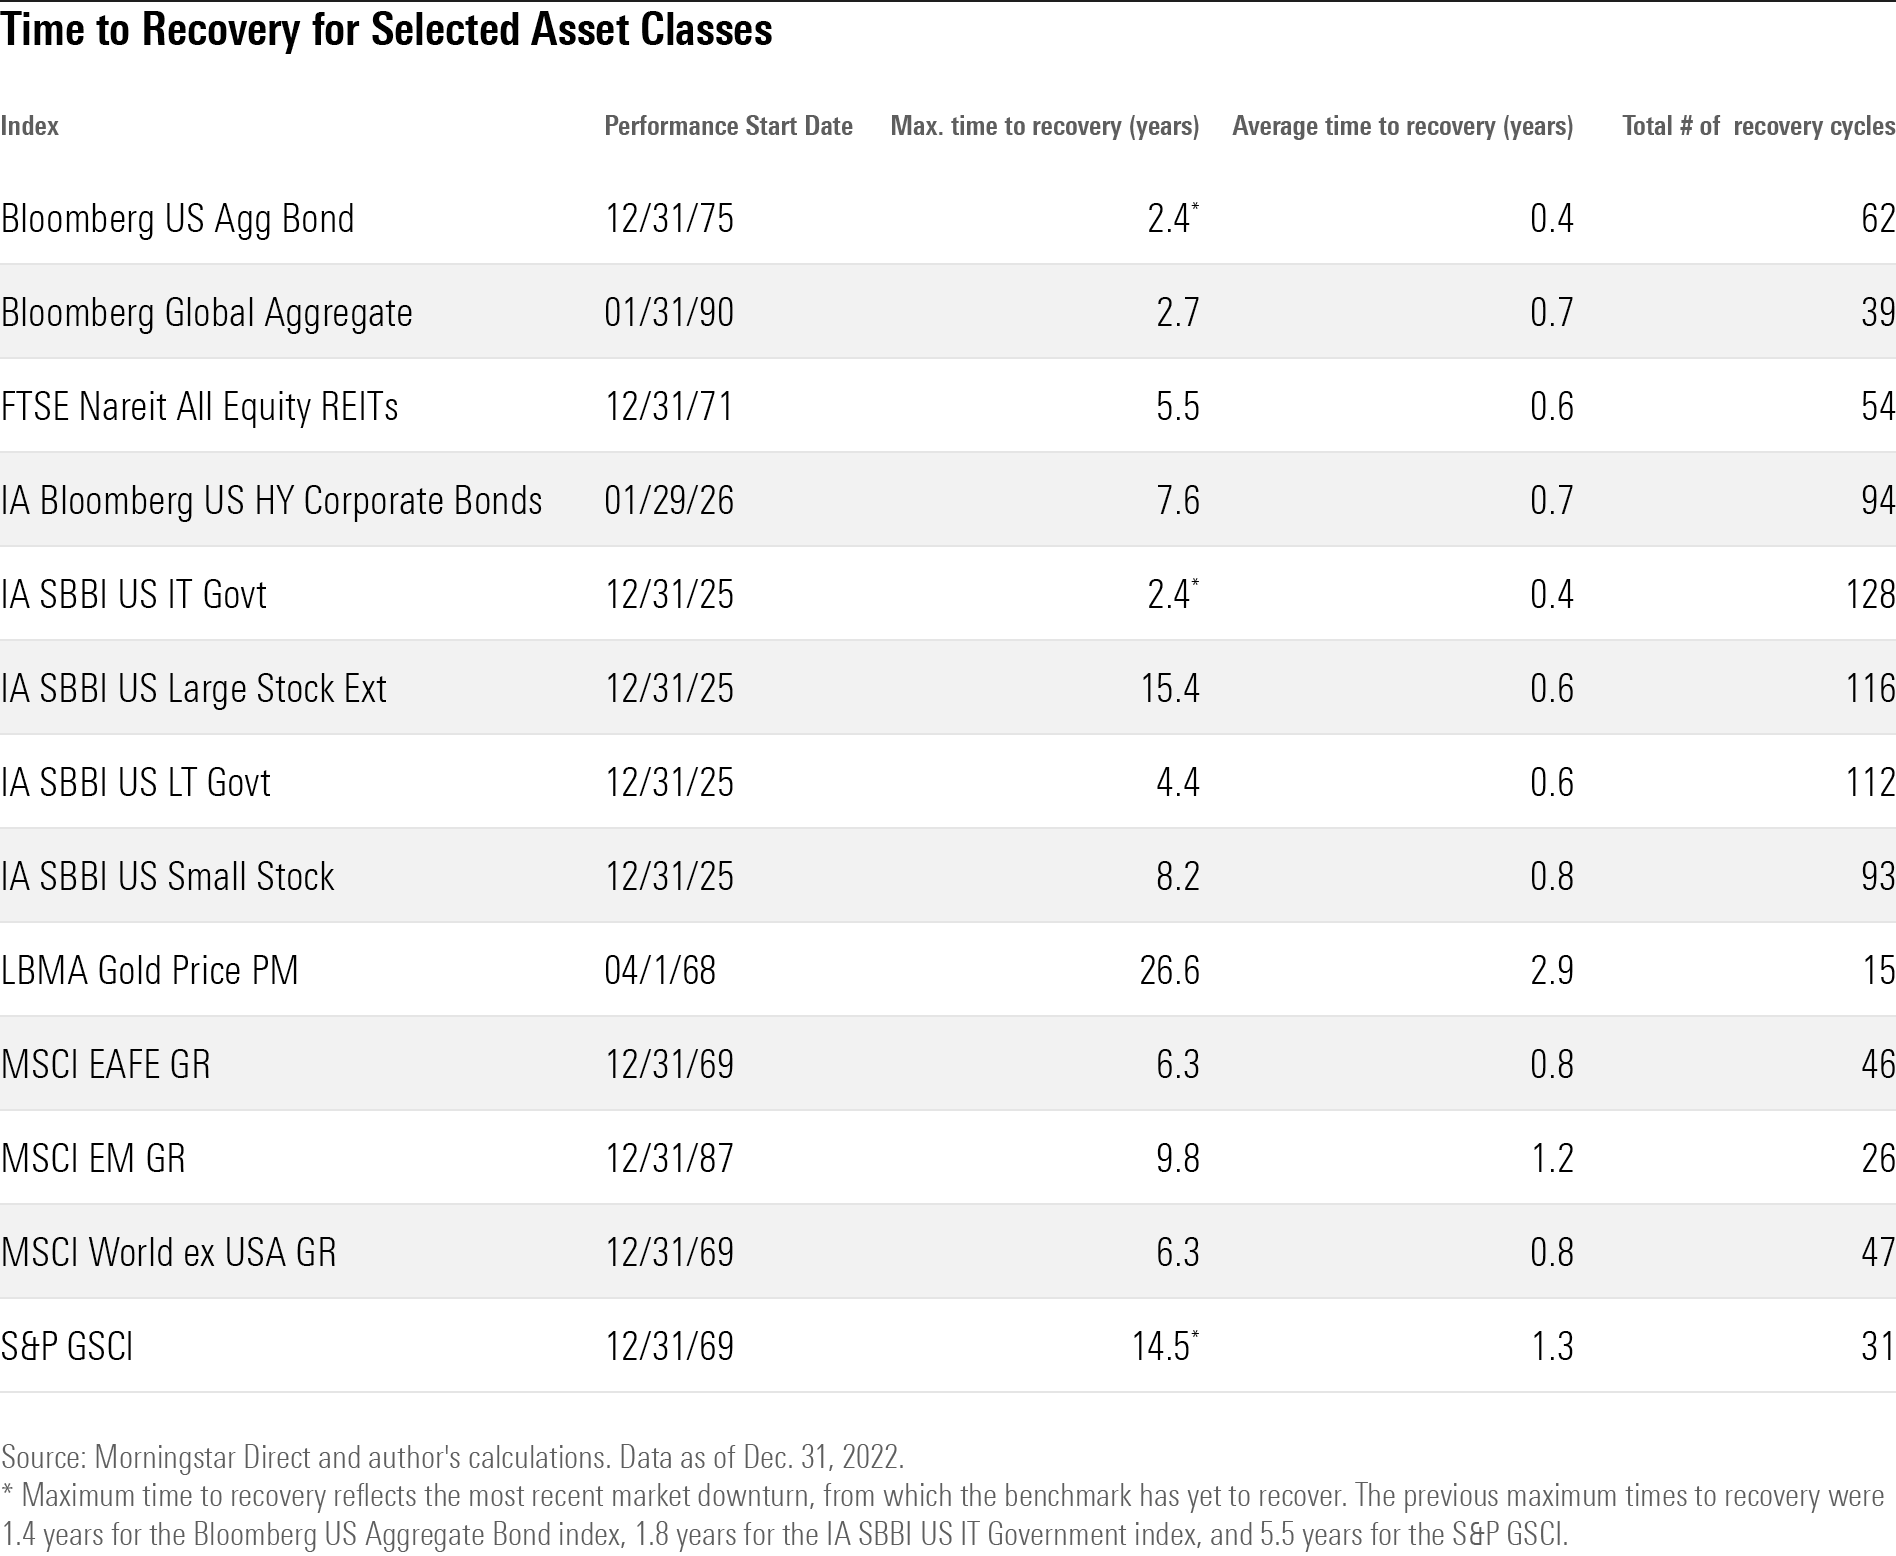 A table showing the maximum time to recovery for key market benchmarks.